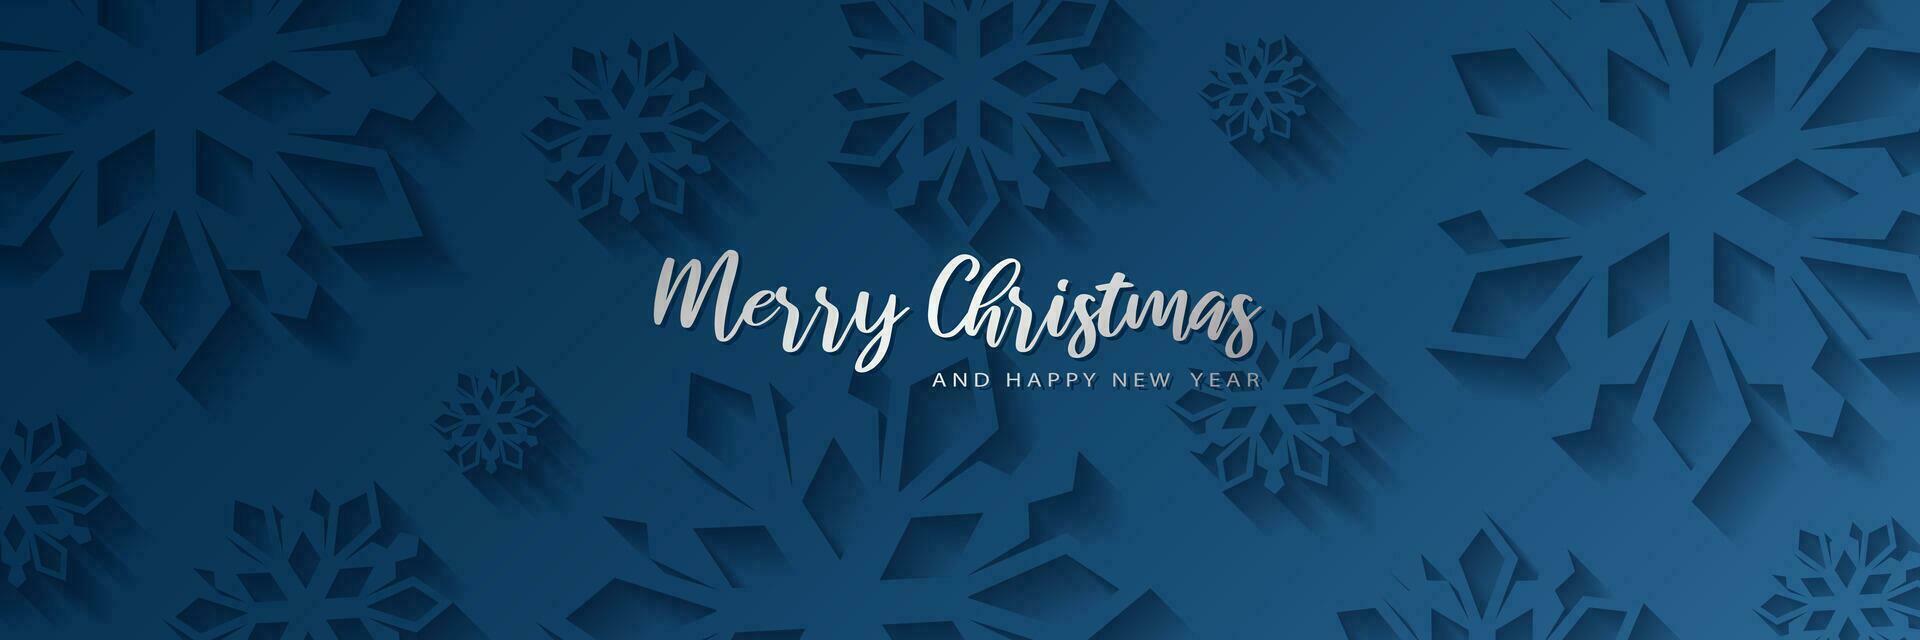 Merry christmas card banner frame with paper cut snowflakes. 3D illustration on blue colored background for presentation, banner, cover, web, flyer, card, sale, poster, slide and social media. vector